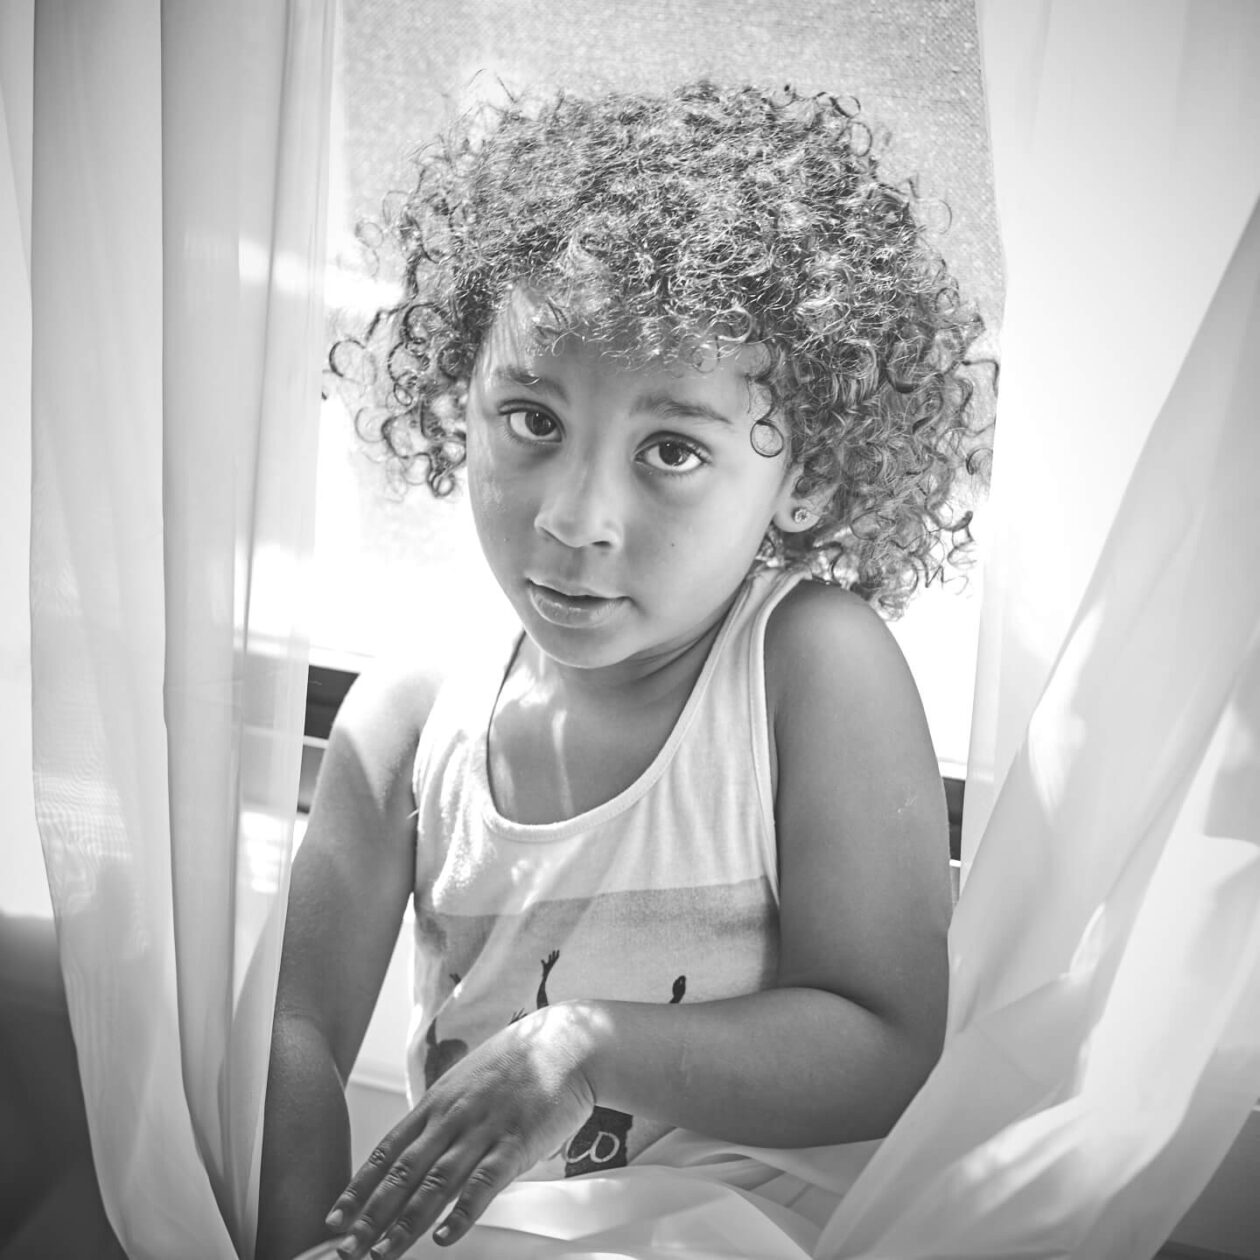 Fuji X Pro2 with xf 56mm f1.2 - Child at home portrait photography